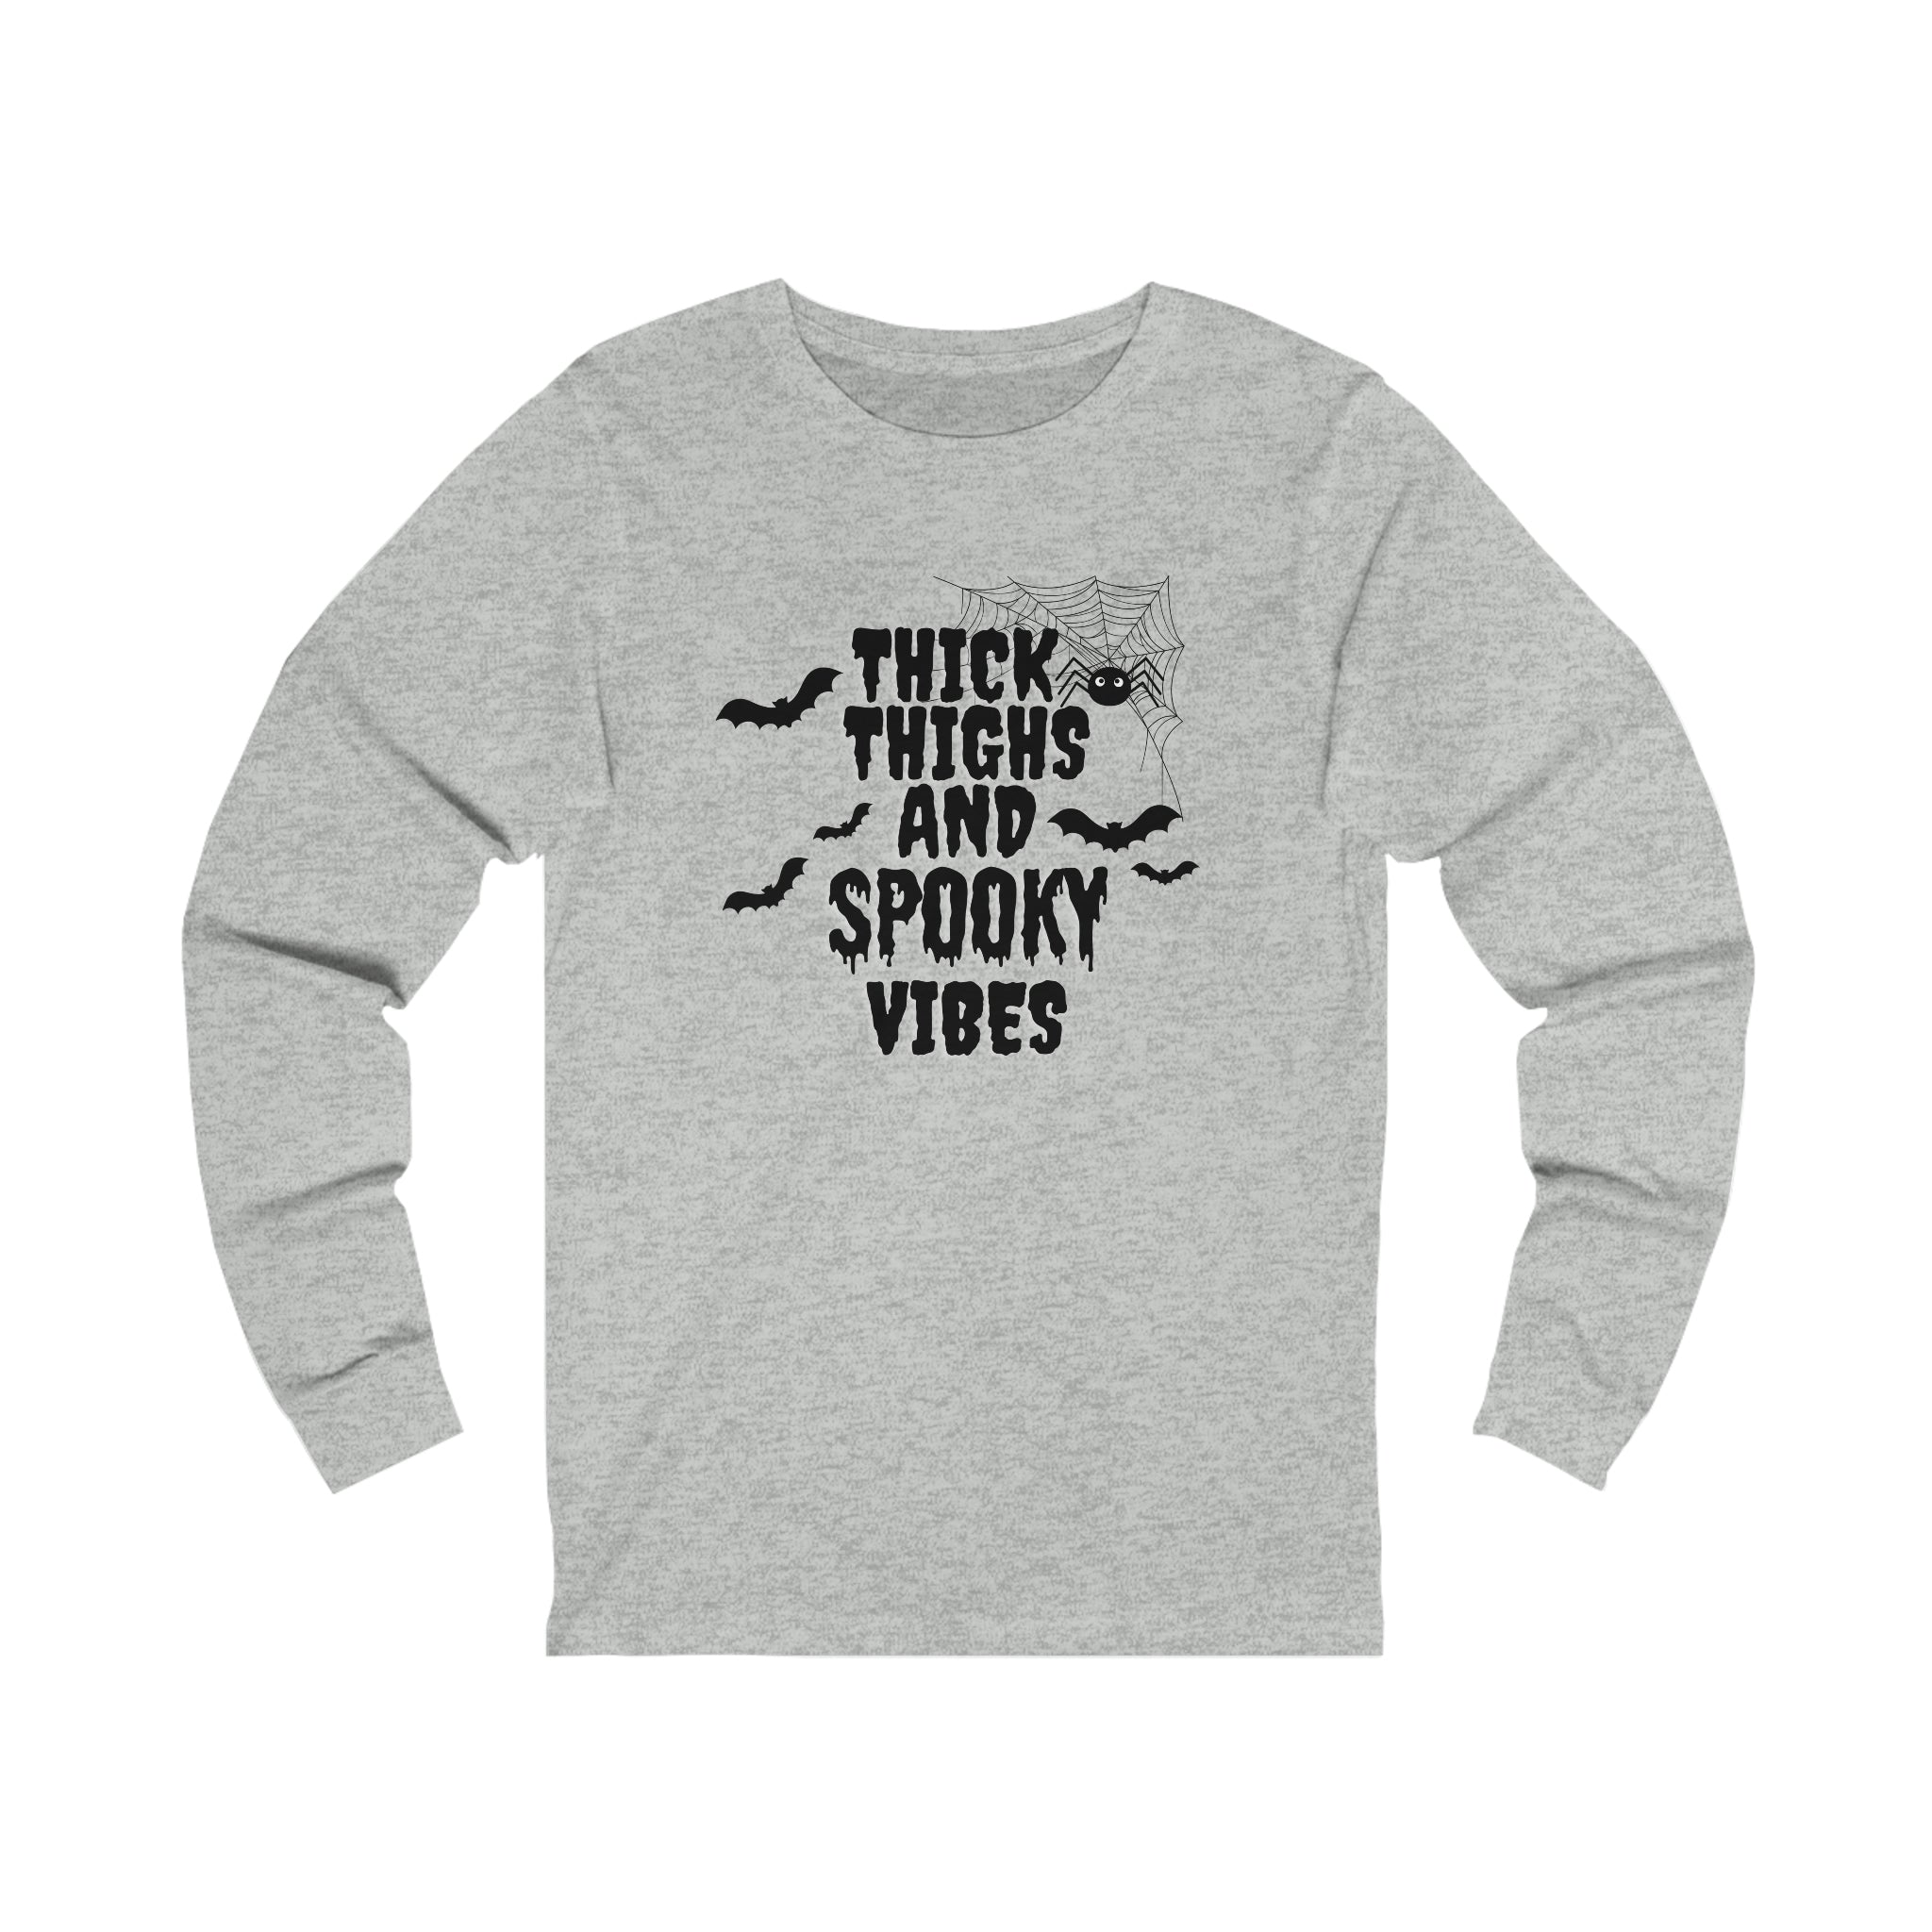 Thick thighs and spooky vibes Long Sleeve Tee